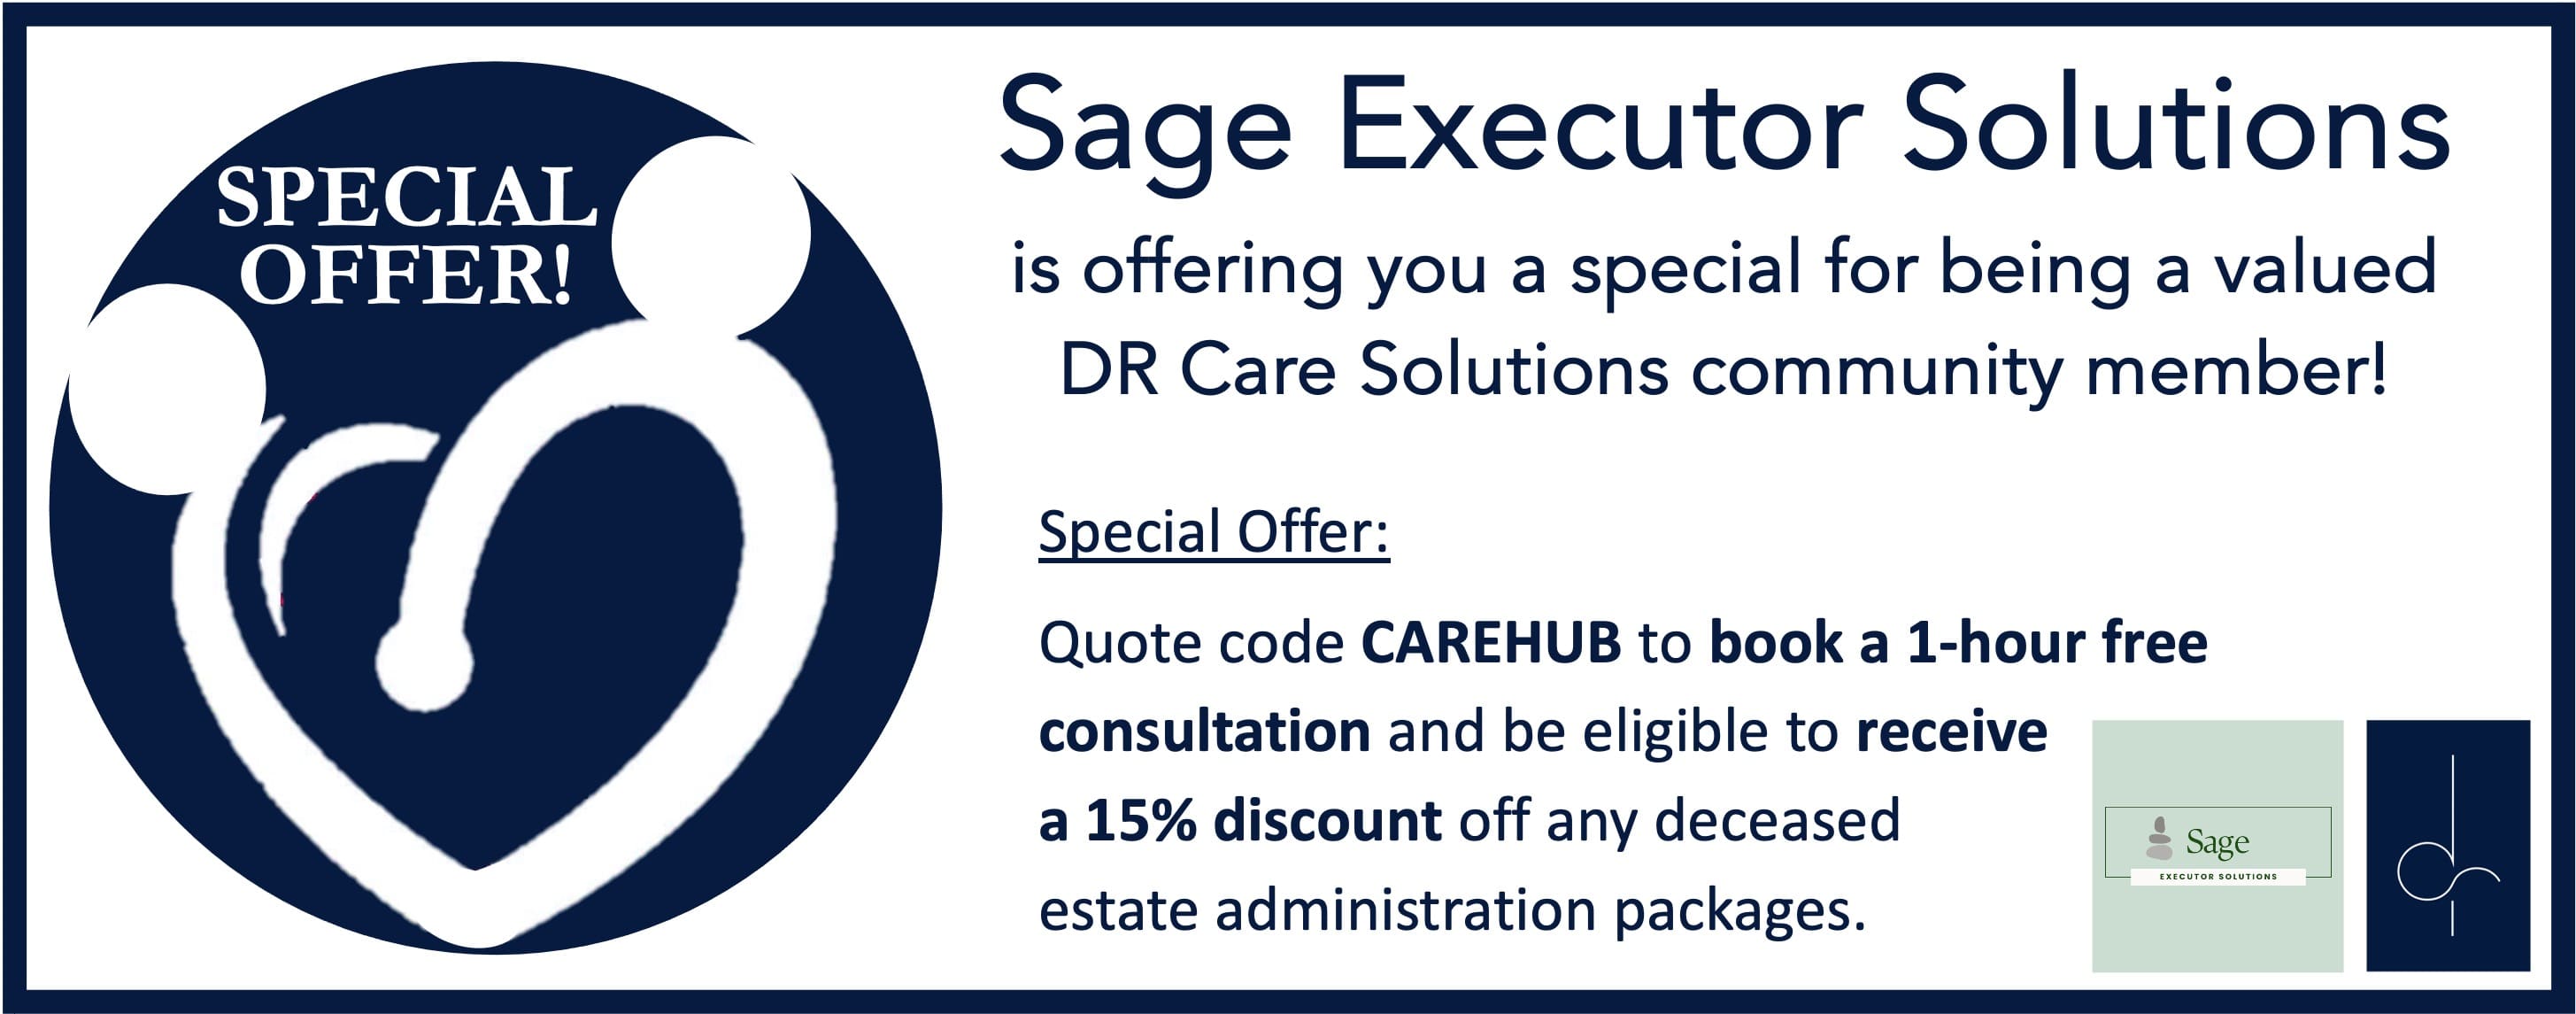 Sage Executor Solutions - Special Offer